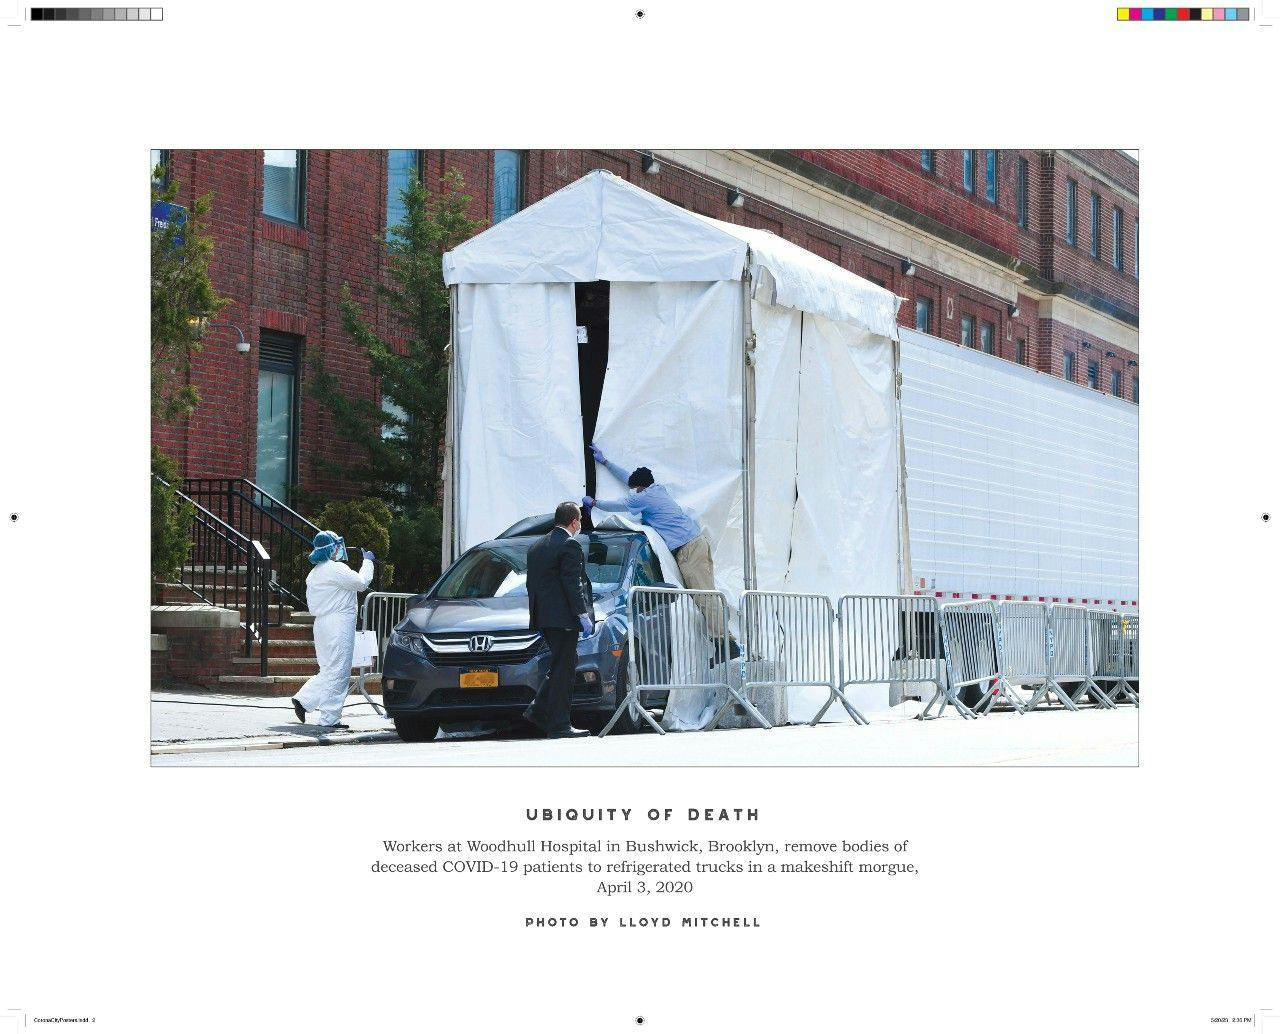 Ubiquity of Death  Workers at Woodhull Hospital in Bushwick, Brooklyn, remove bodies of deceased COVID-19 patients to refrigerated trucks in a makeshift morgue, April 3, 2020.    (Photo by Lloyd Mitchell, published in Corona City.)